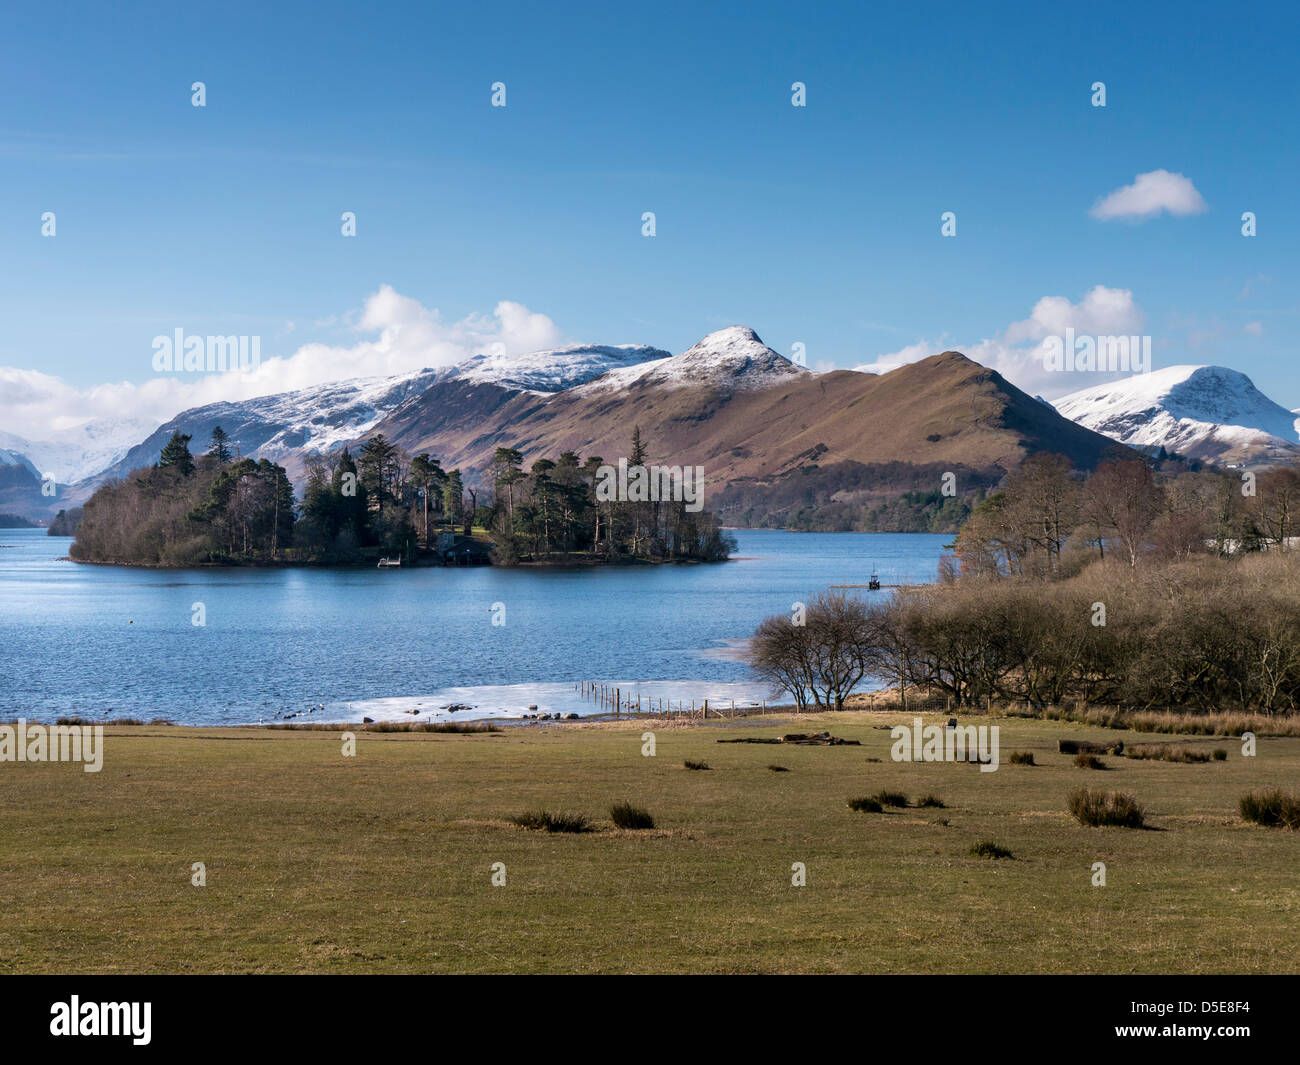 Derwent Isle with sits in an idyllic location at the Northern end of Derwent Water in the English Lake District. Stock Photo